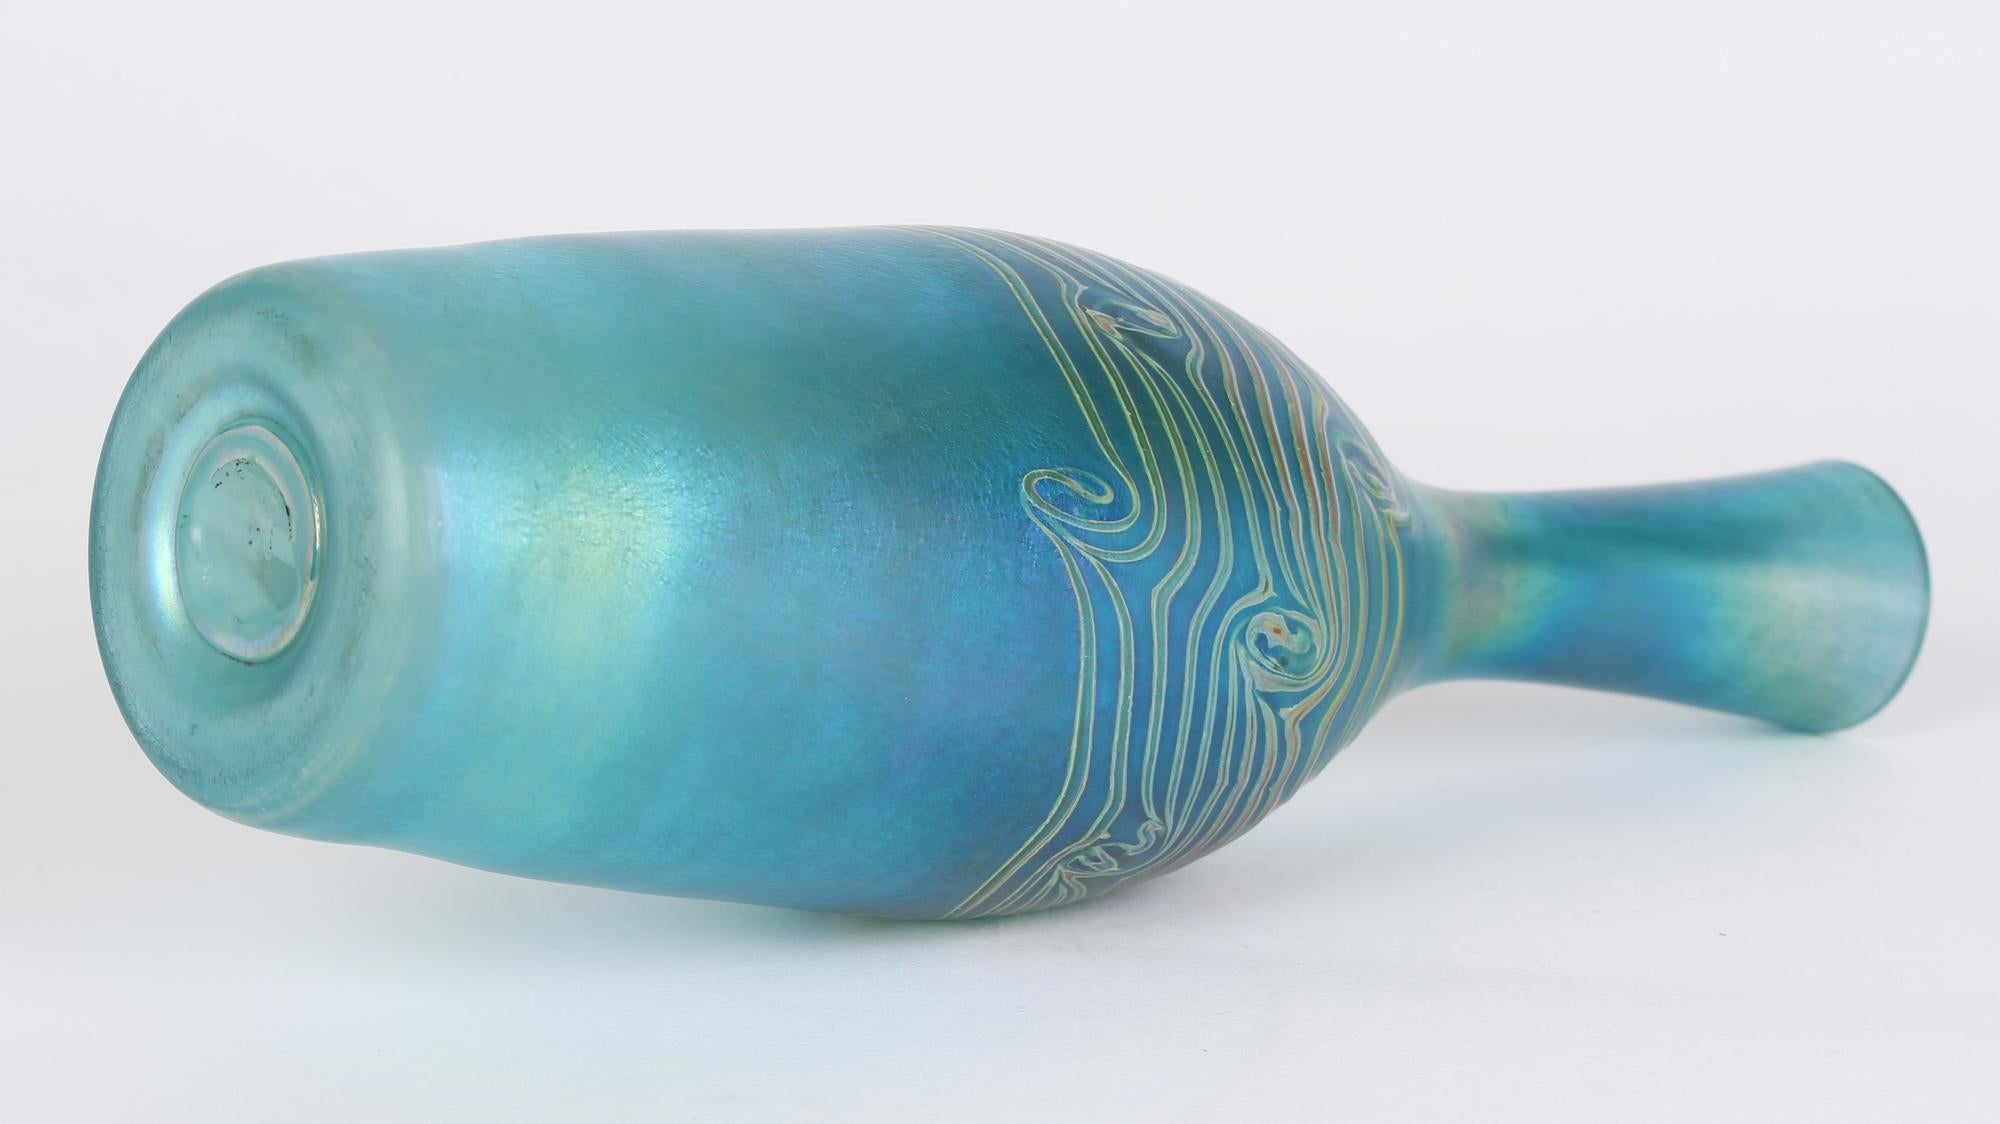 Tall and stylish iridescent blue bottle shaped art glass vase with trailed peacock designs dating from the 20th century. The hand-blown vase is of tall slender shape and is beautifully made in blue tinted glass with a wonderful oily iridescence to